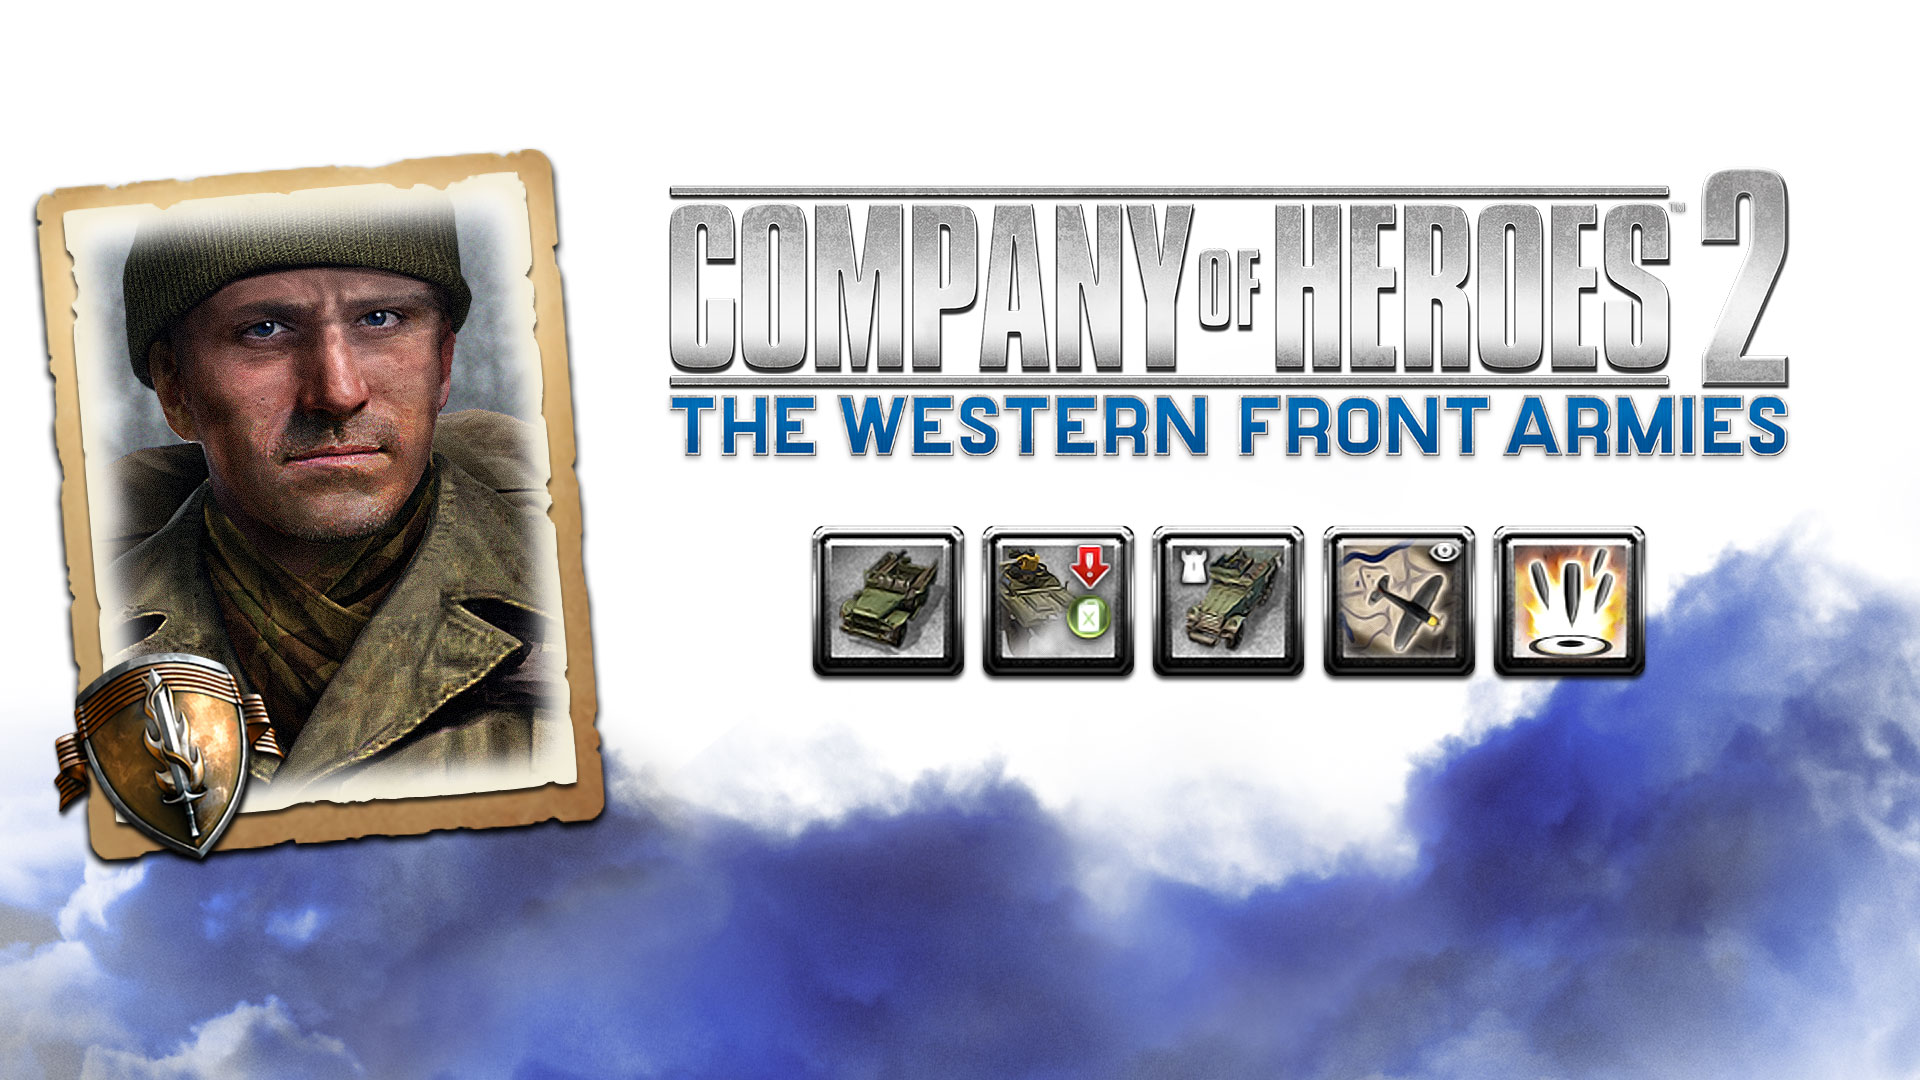 Company of Heroes 2 - US Forces Commanders Collection DLC Steam CD Key, 4.17 usd